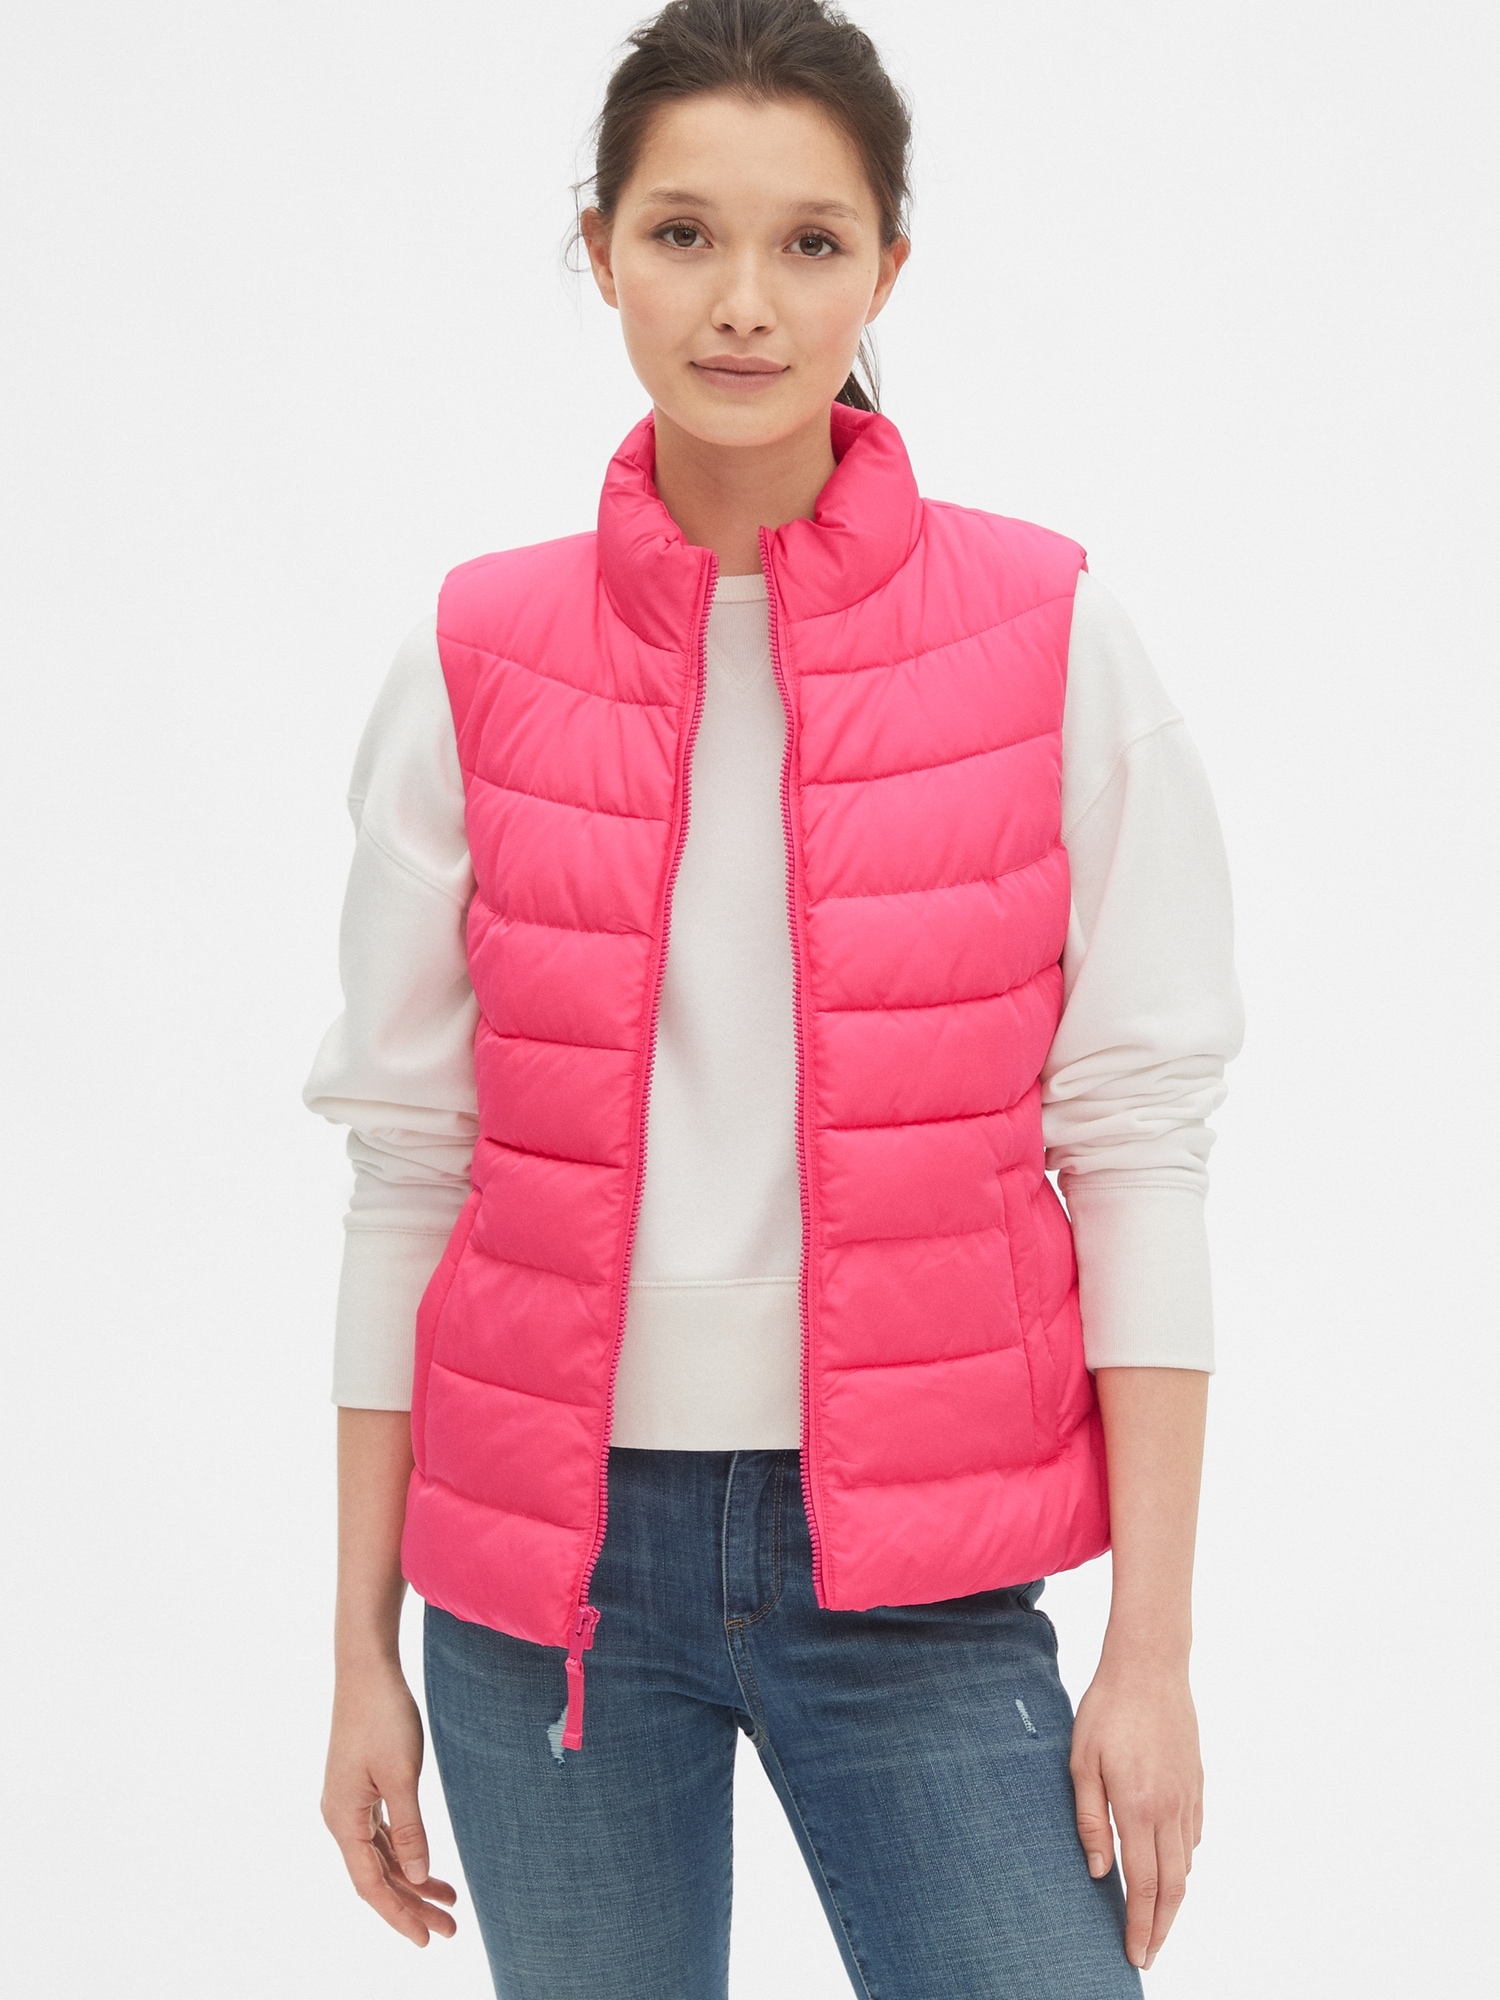 ColdControl Upcycled Lightweight Puffer Vest | Gap